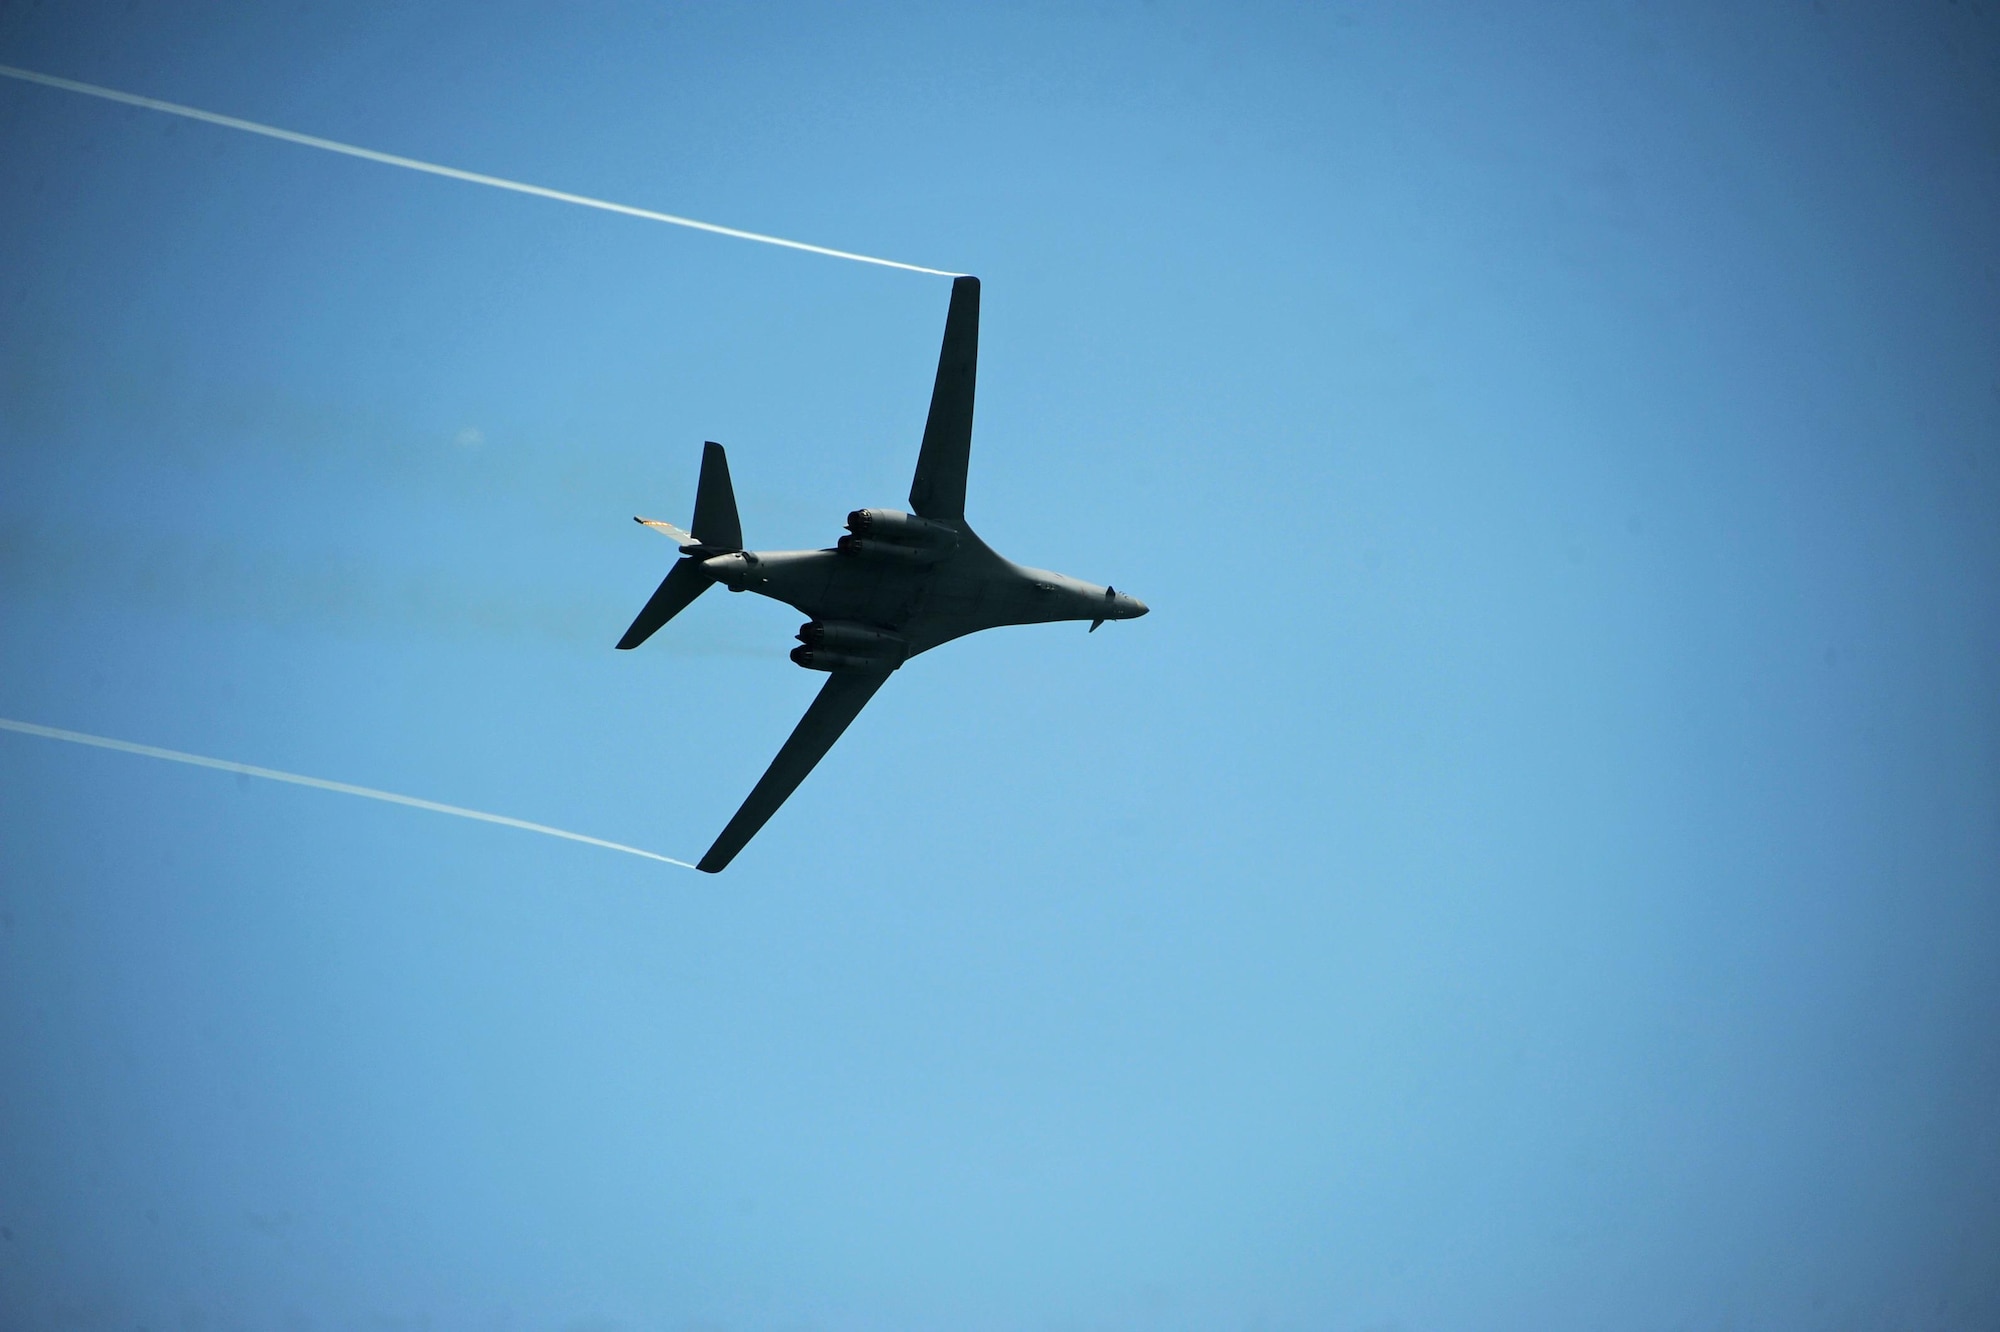 A B-1B Lancer soars over Miami Beach, Fla., during the Salute to America’s Heroes Air and Sea Show in Miami Beach, Fla., May 27, 2017. The airshow featured various aircraft representing each branch of the U.S. Armed Forces, including ground personnel to educate the public and airshow attendees about their respective branch’s mission. (U.S. Air Force photo by Senior Airman Erin Trower)